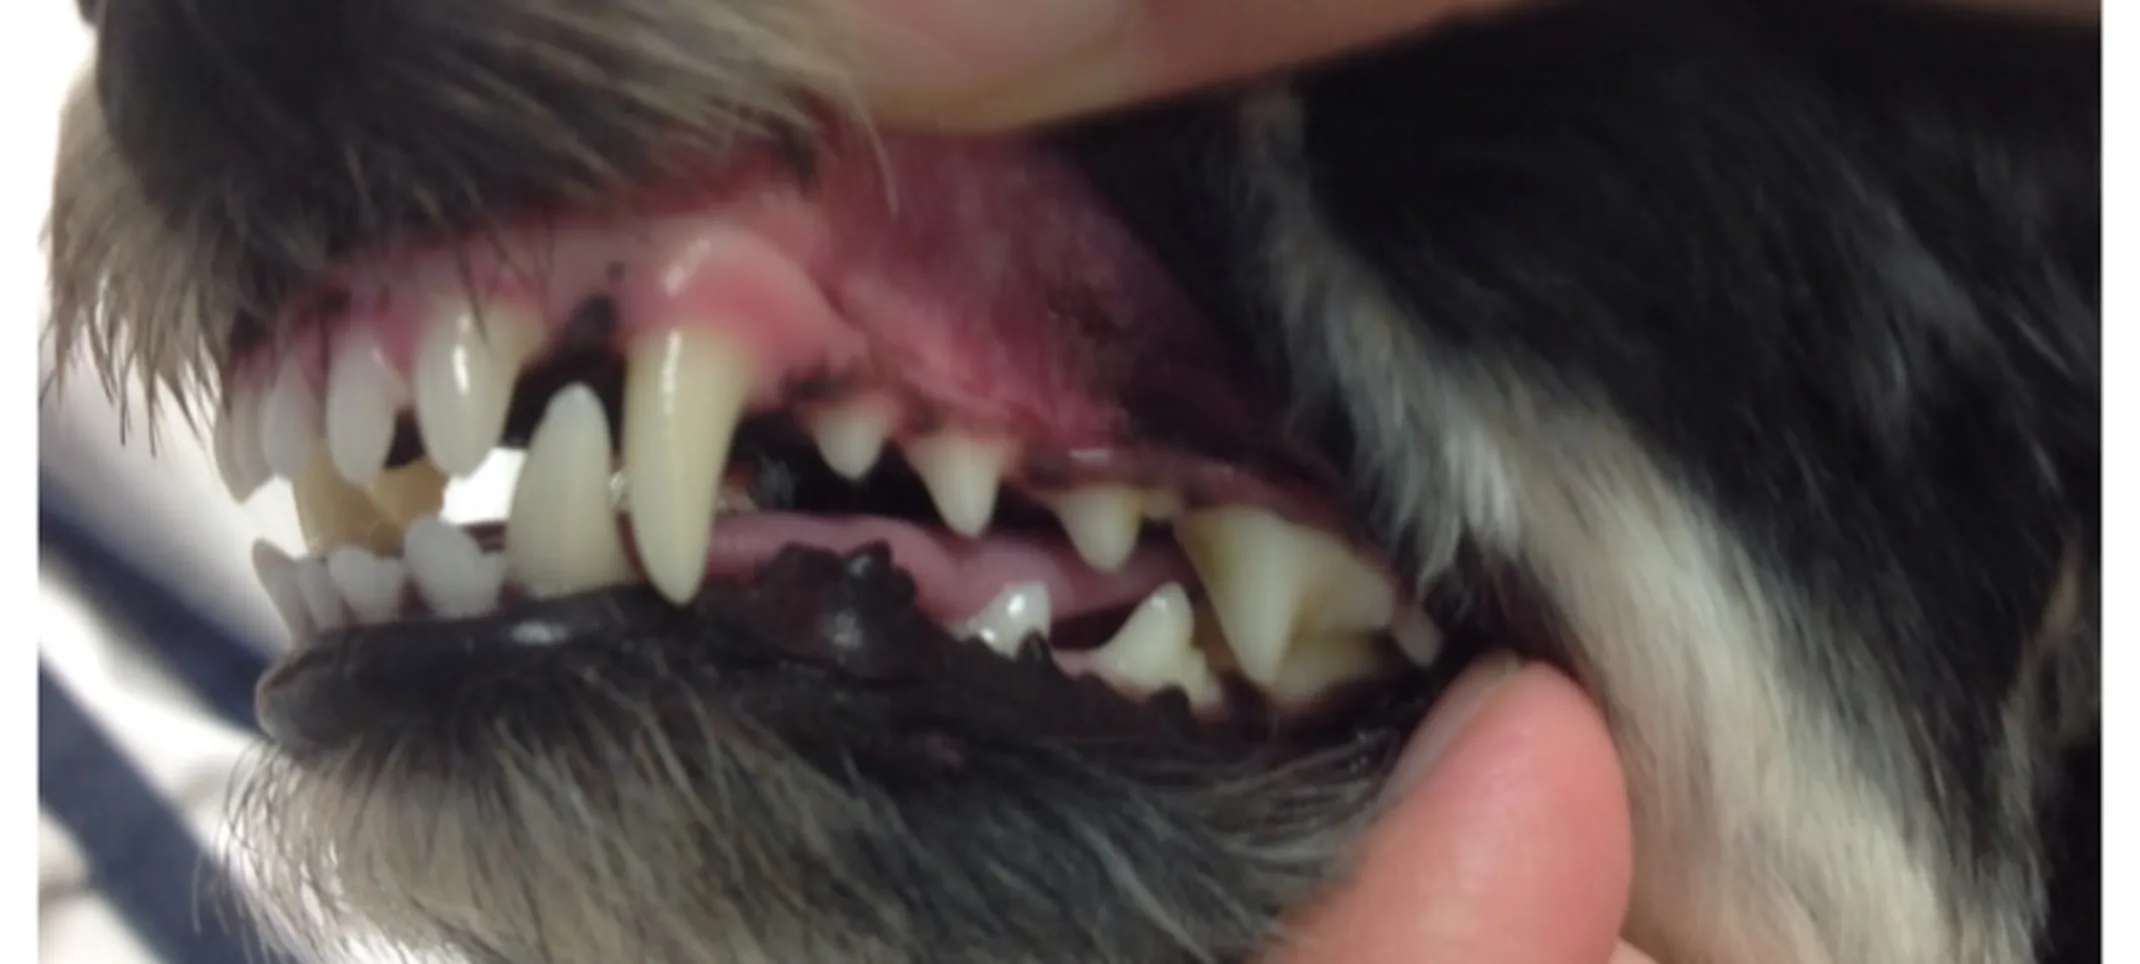 Person showing a dog's teeth